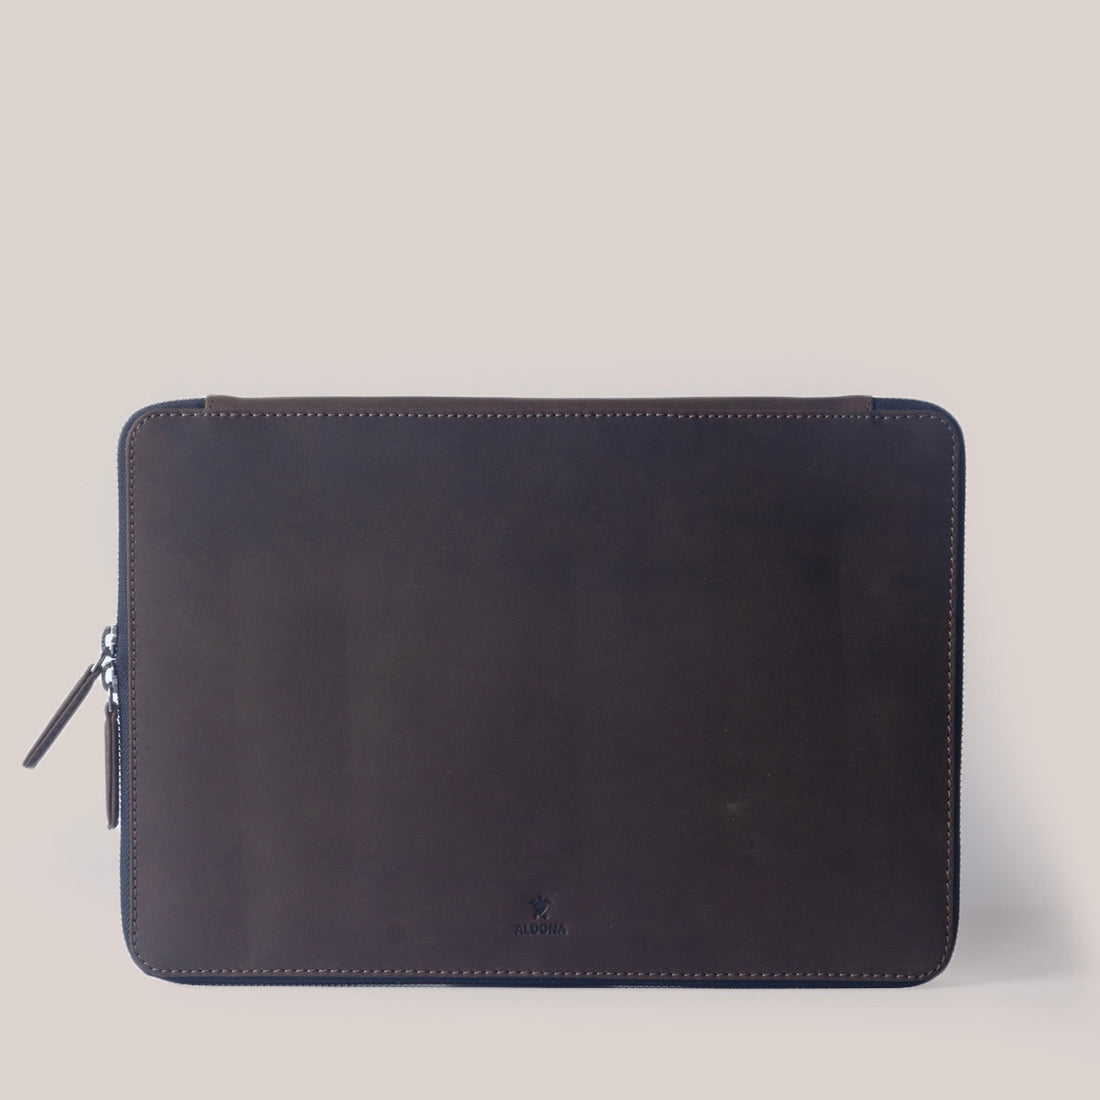 DELL XPS 13 Zippered Laptop Case - Burnt Tobacco